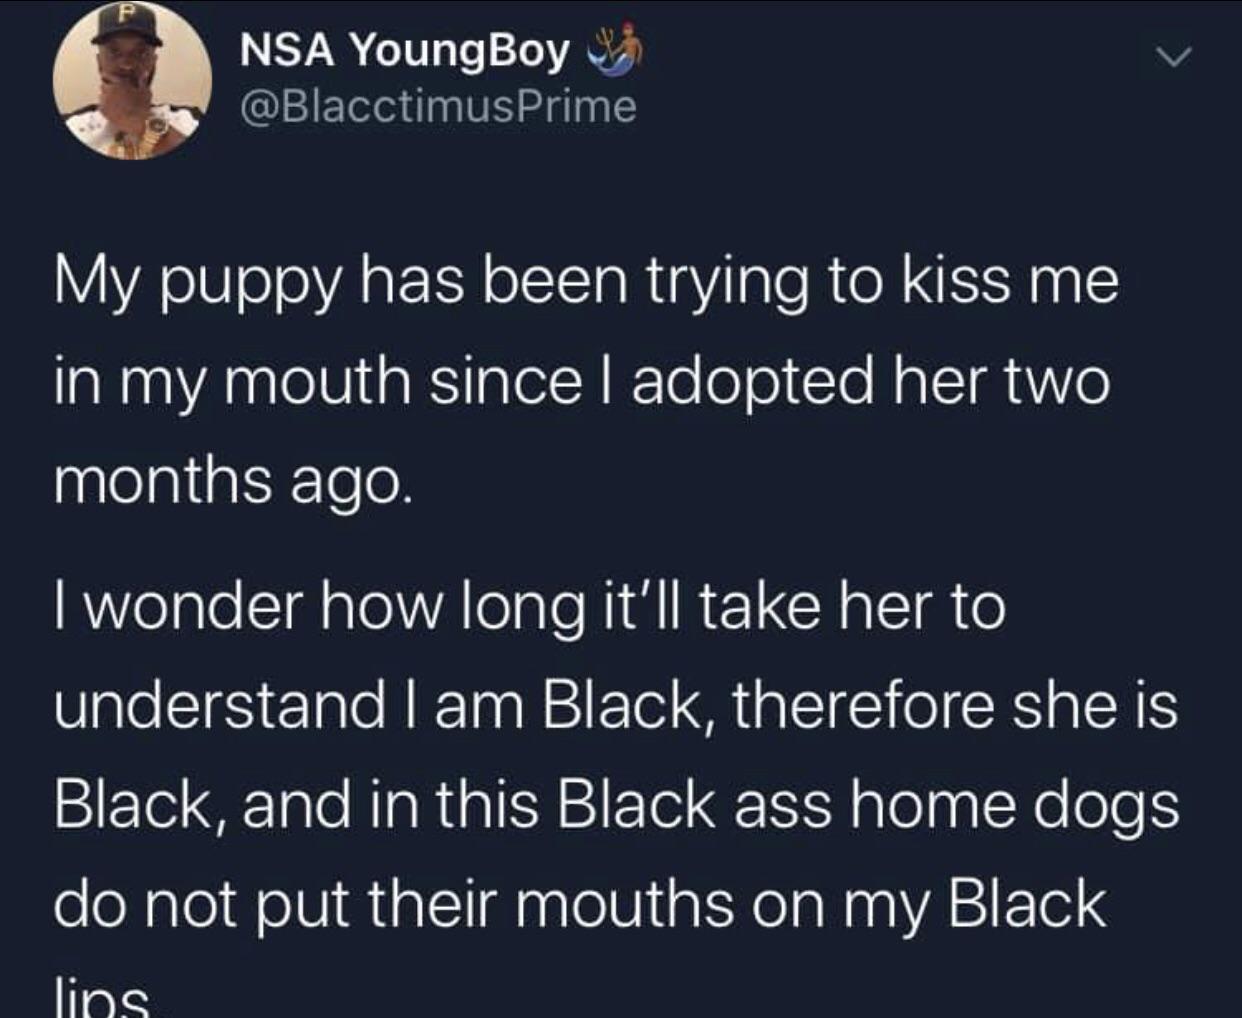 YoungBoy Prime My puppy has been trying to kiss me in my mouth since I adopted her two months ago I wonder how long it'll take her to understand I am Black, therefore she is Black, and in this Black ass home dogs do not put their mouth